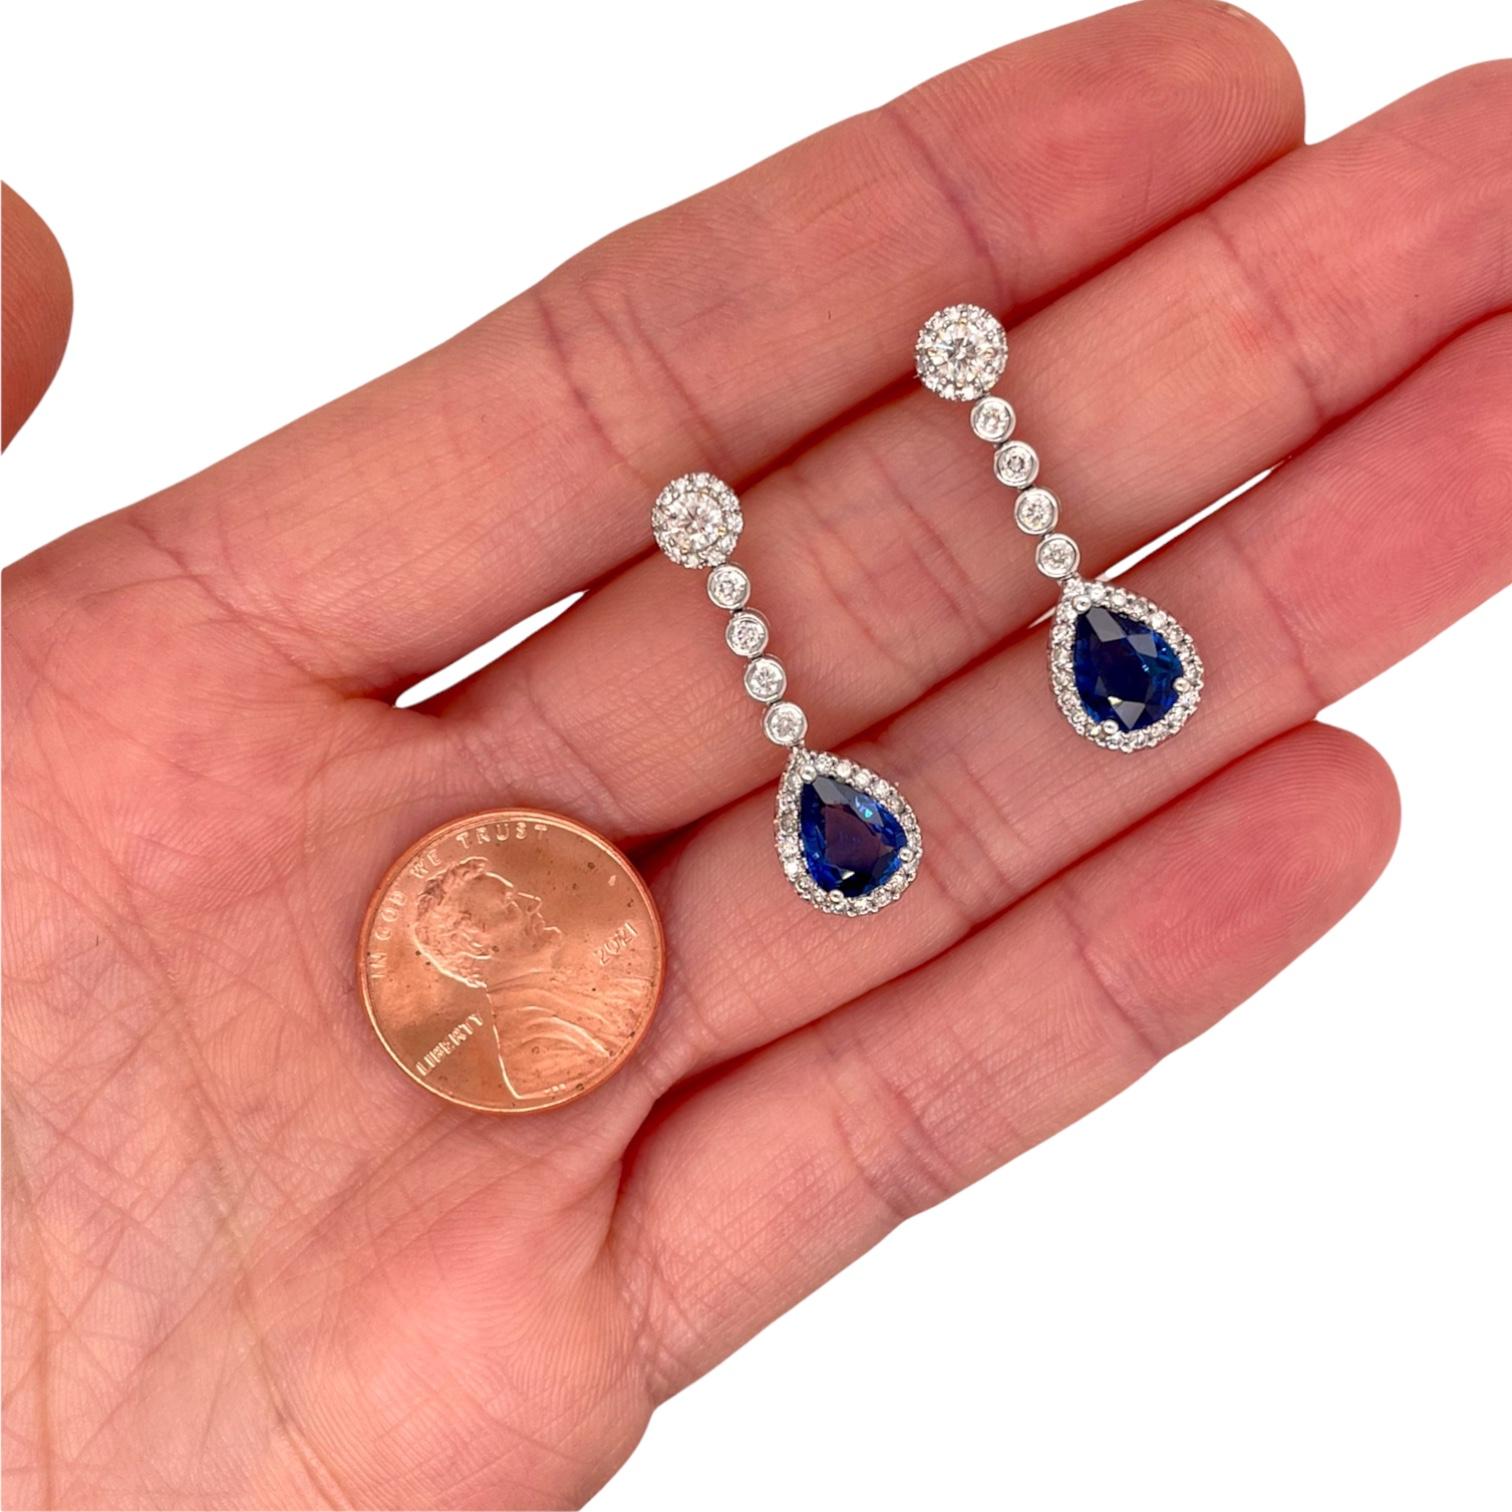 Earrings contain 2 pear shape brilliant sapphires, 2.48tcw and round brilliant diamonds , 0.86tcw. Diamonds are G in color and SI1 in clarity, excellent cut. Sapphires measure approximately 8x6mm. All stones are mounted within handmade 18k white